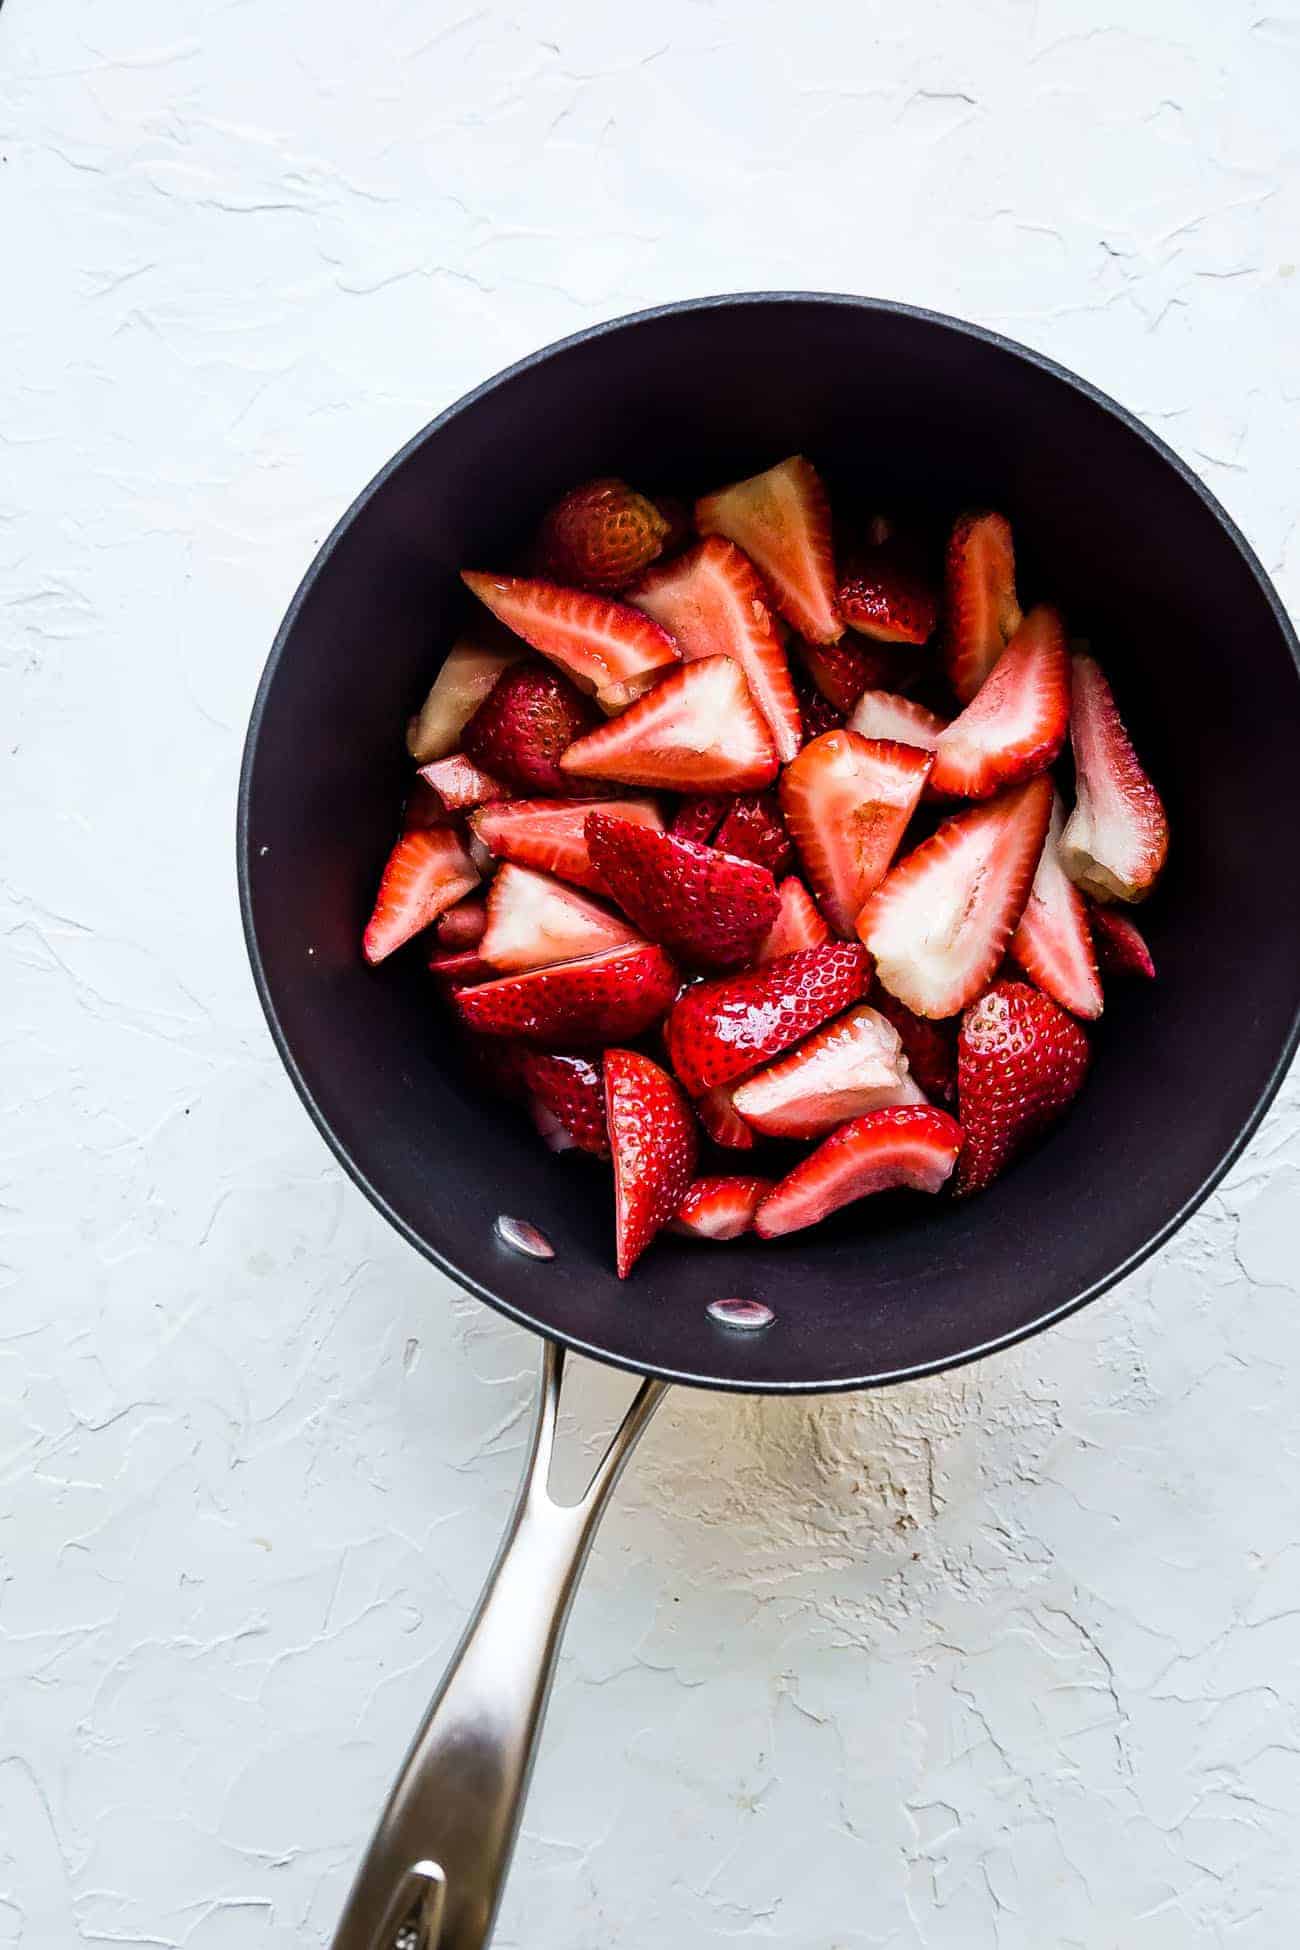 hulled and sliced strawberries in a saucepan